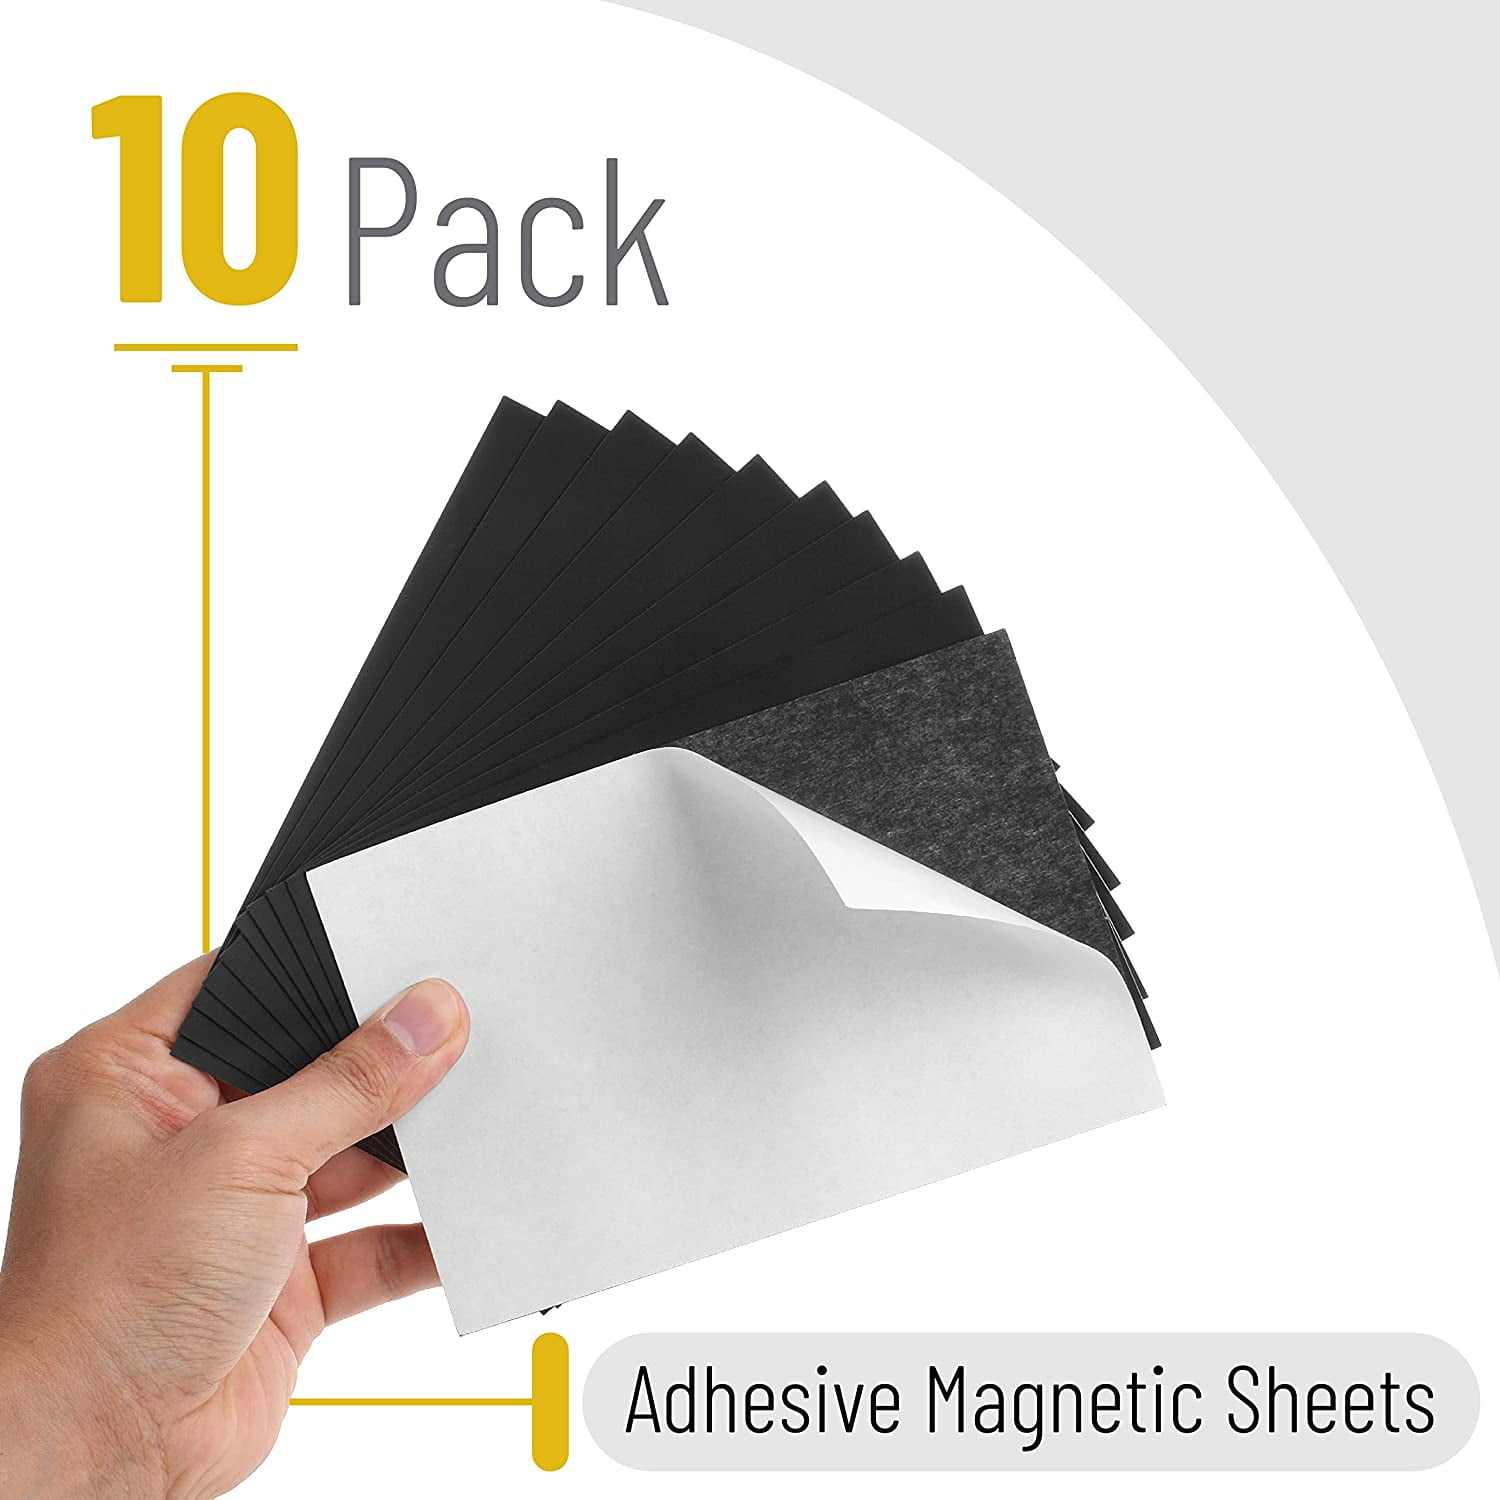 10 Pack 6.8x4.8 Magnetic Sheets Non Adhesive Flexible Rubber